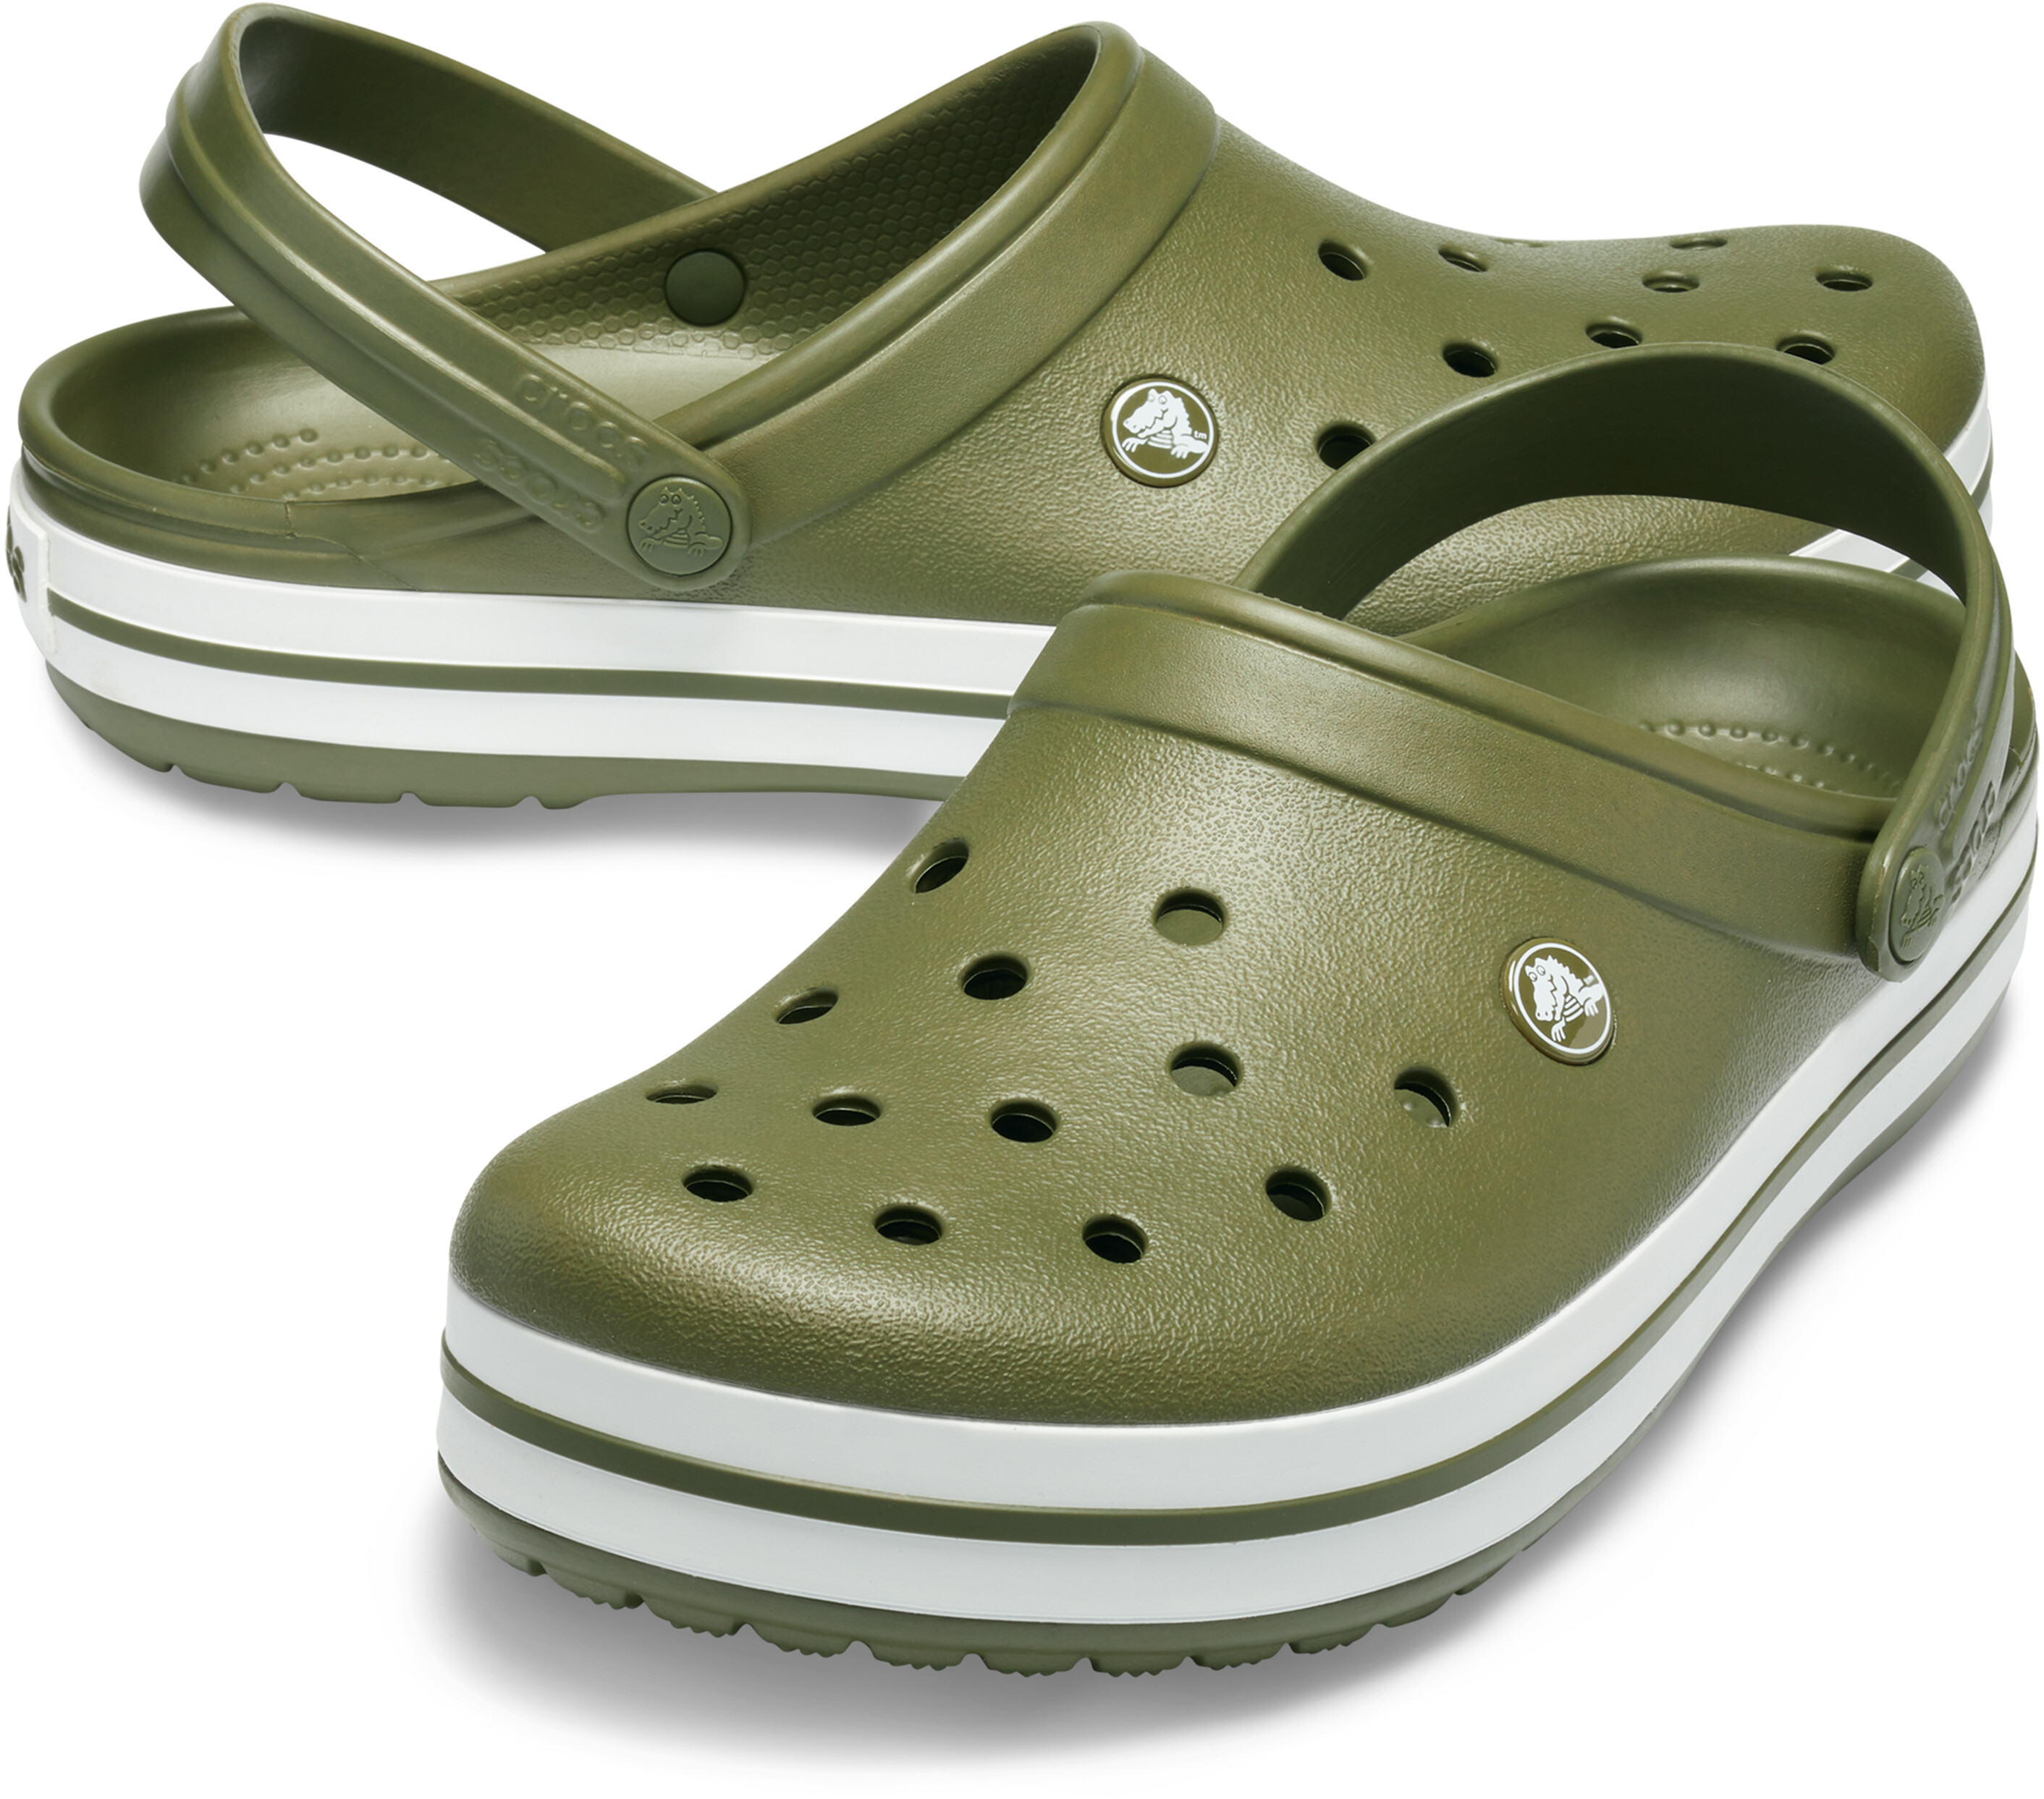 Crocs Crocband Clogs army green/white at addnature.co.uk